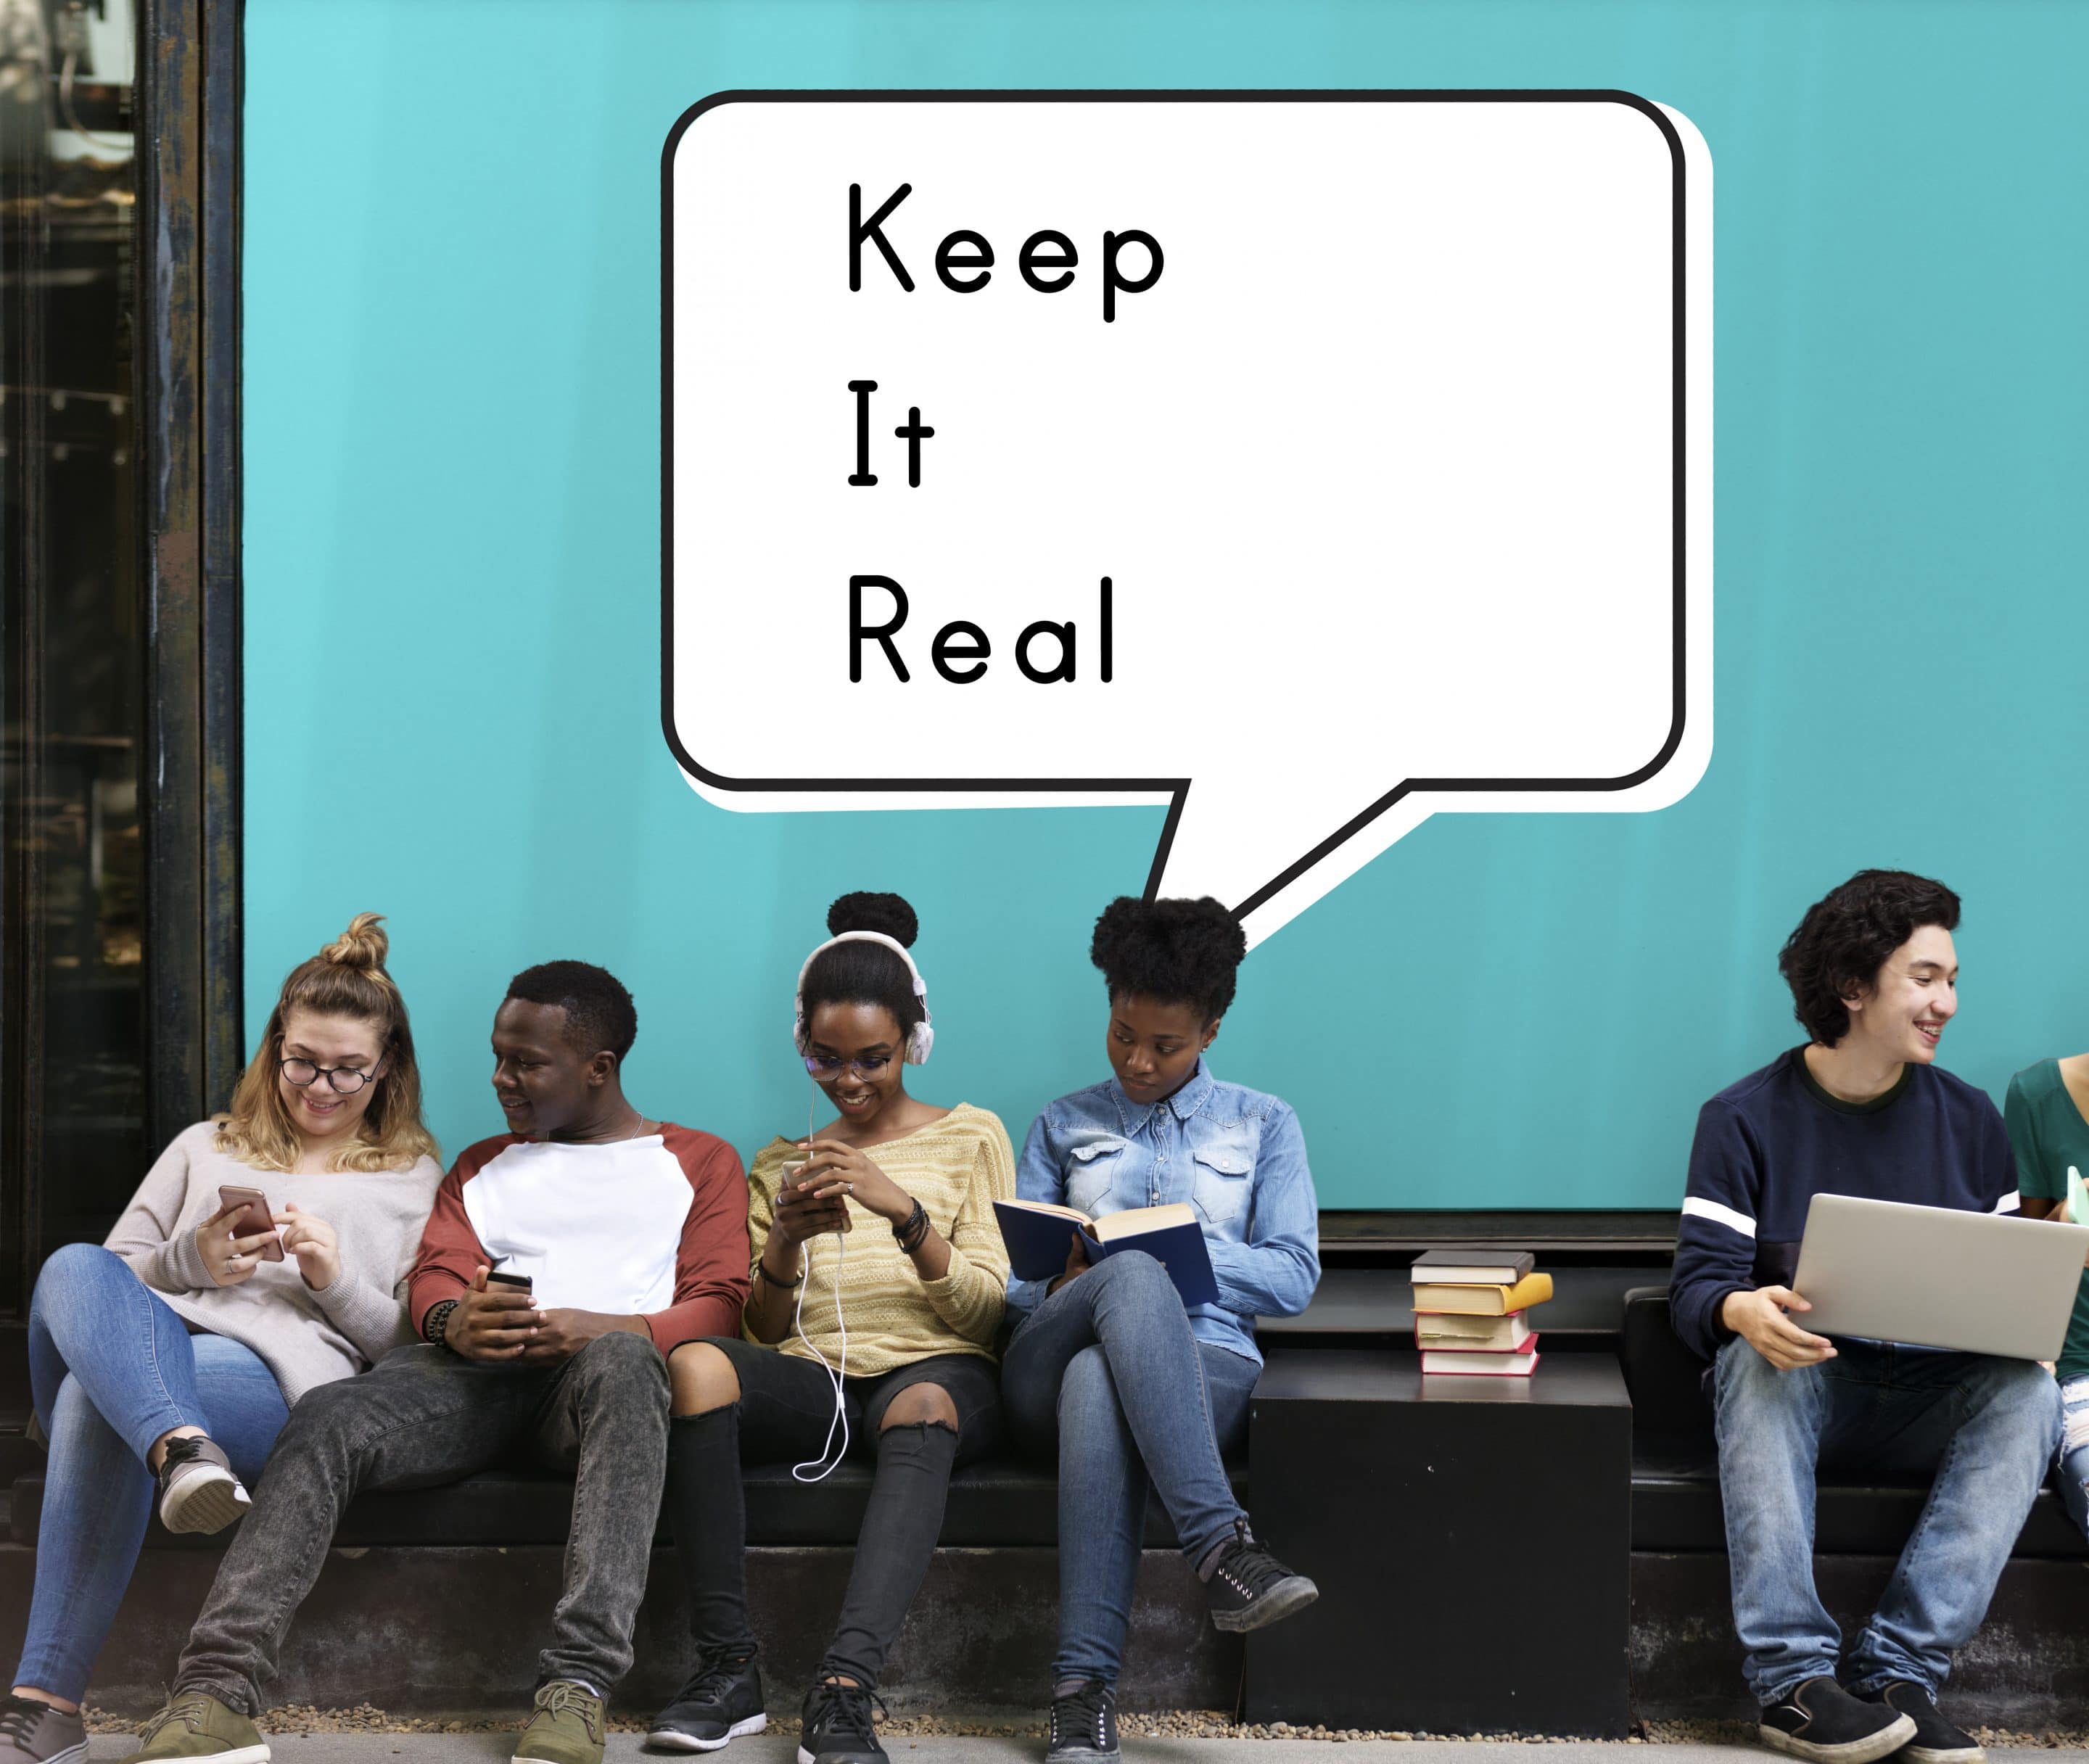 Kids sitting on a bench under a "keep it real" sign showing what authentic social media branding is.